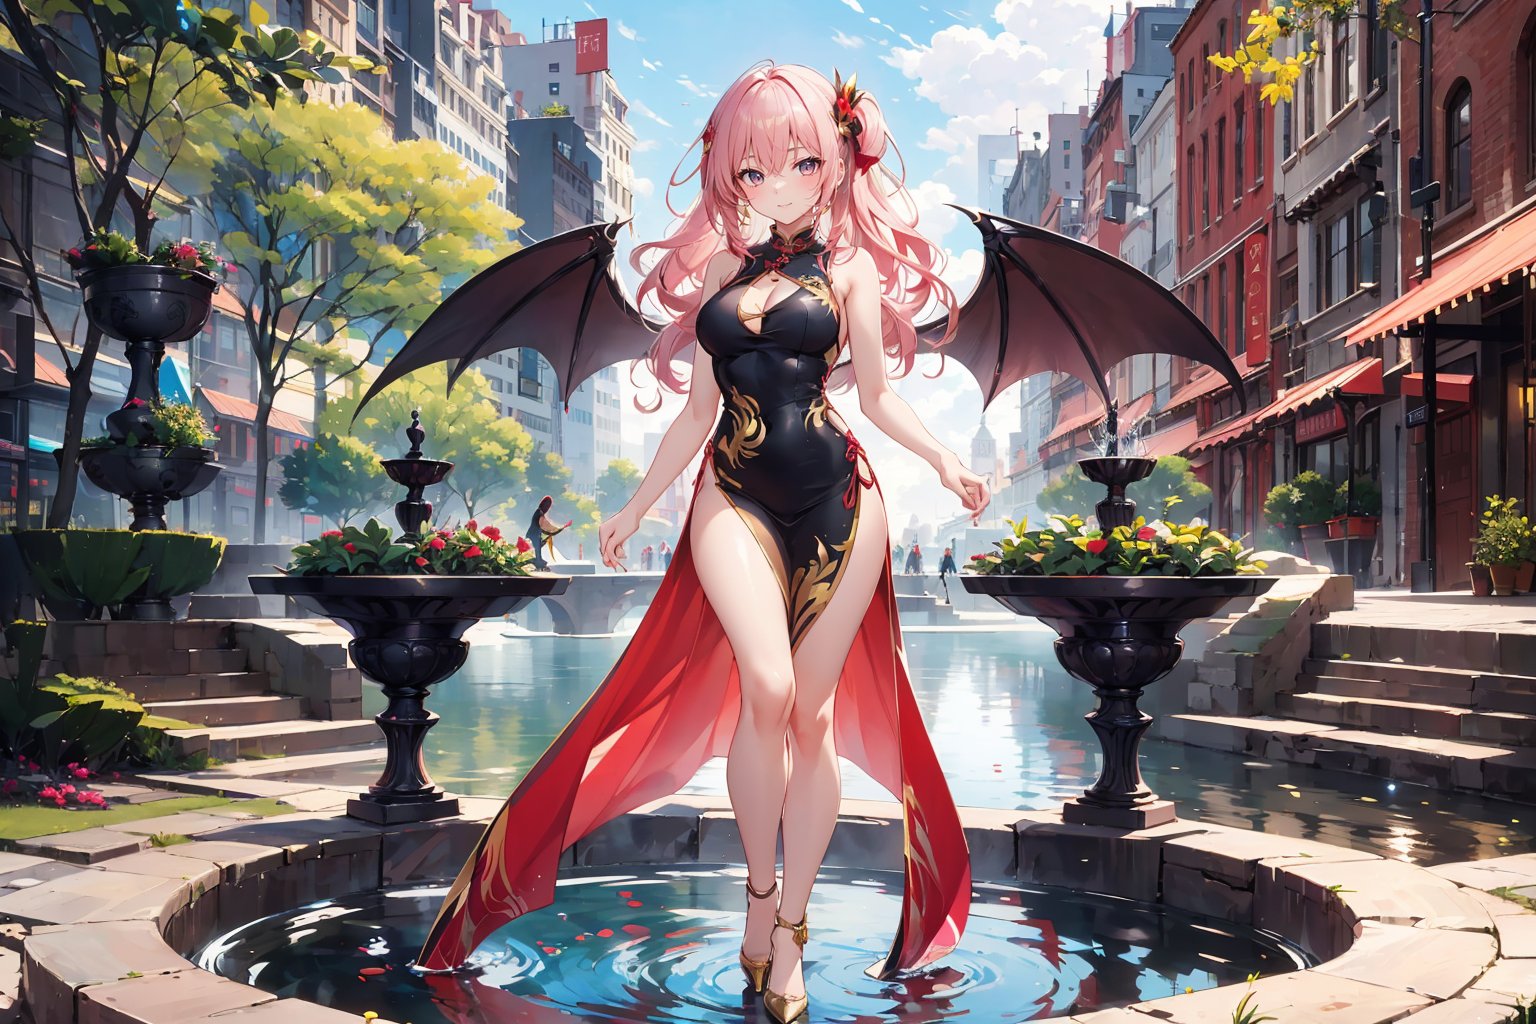 A 17-year-old girl with a radiant smile and waist-long, wavy hair adorns a striking cheongsam dress in shades of white, red, and gold. Her legs are clad in high heels as she stands confidently in the Fountain Square, surrounded by serene water features. Unconventionally, her long pink locks cascade down her back like a fiery waterfall. Above all, majestic wings sprout from her shoulders, adding an ethereal touch to this whimsical scene.